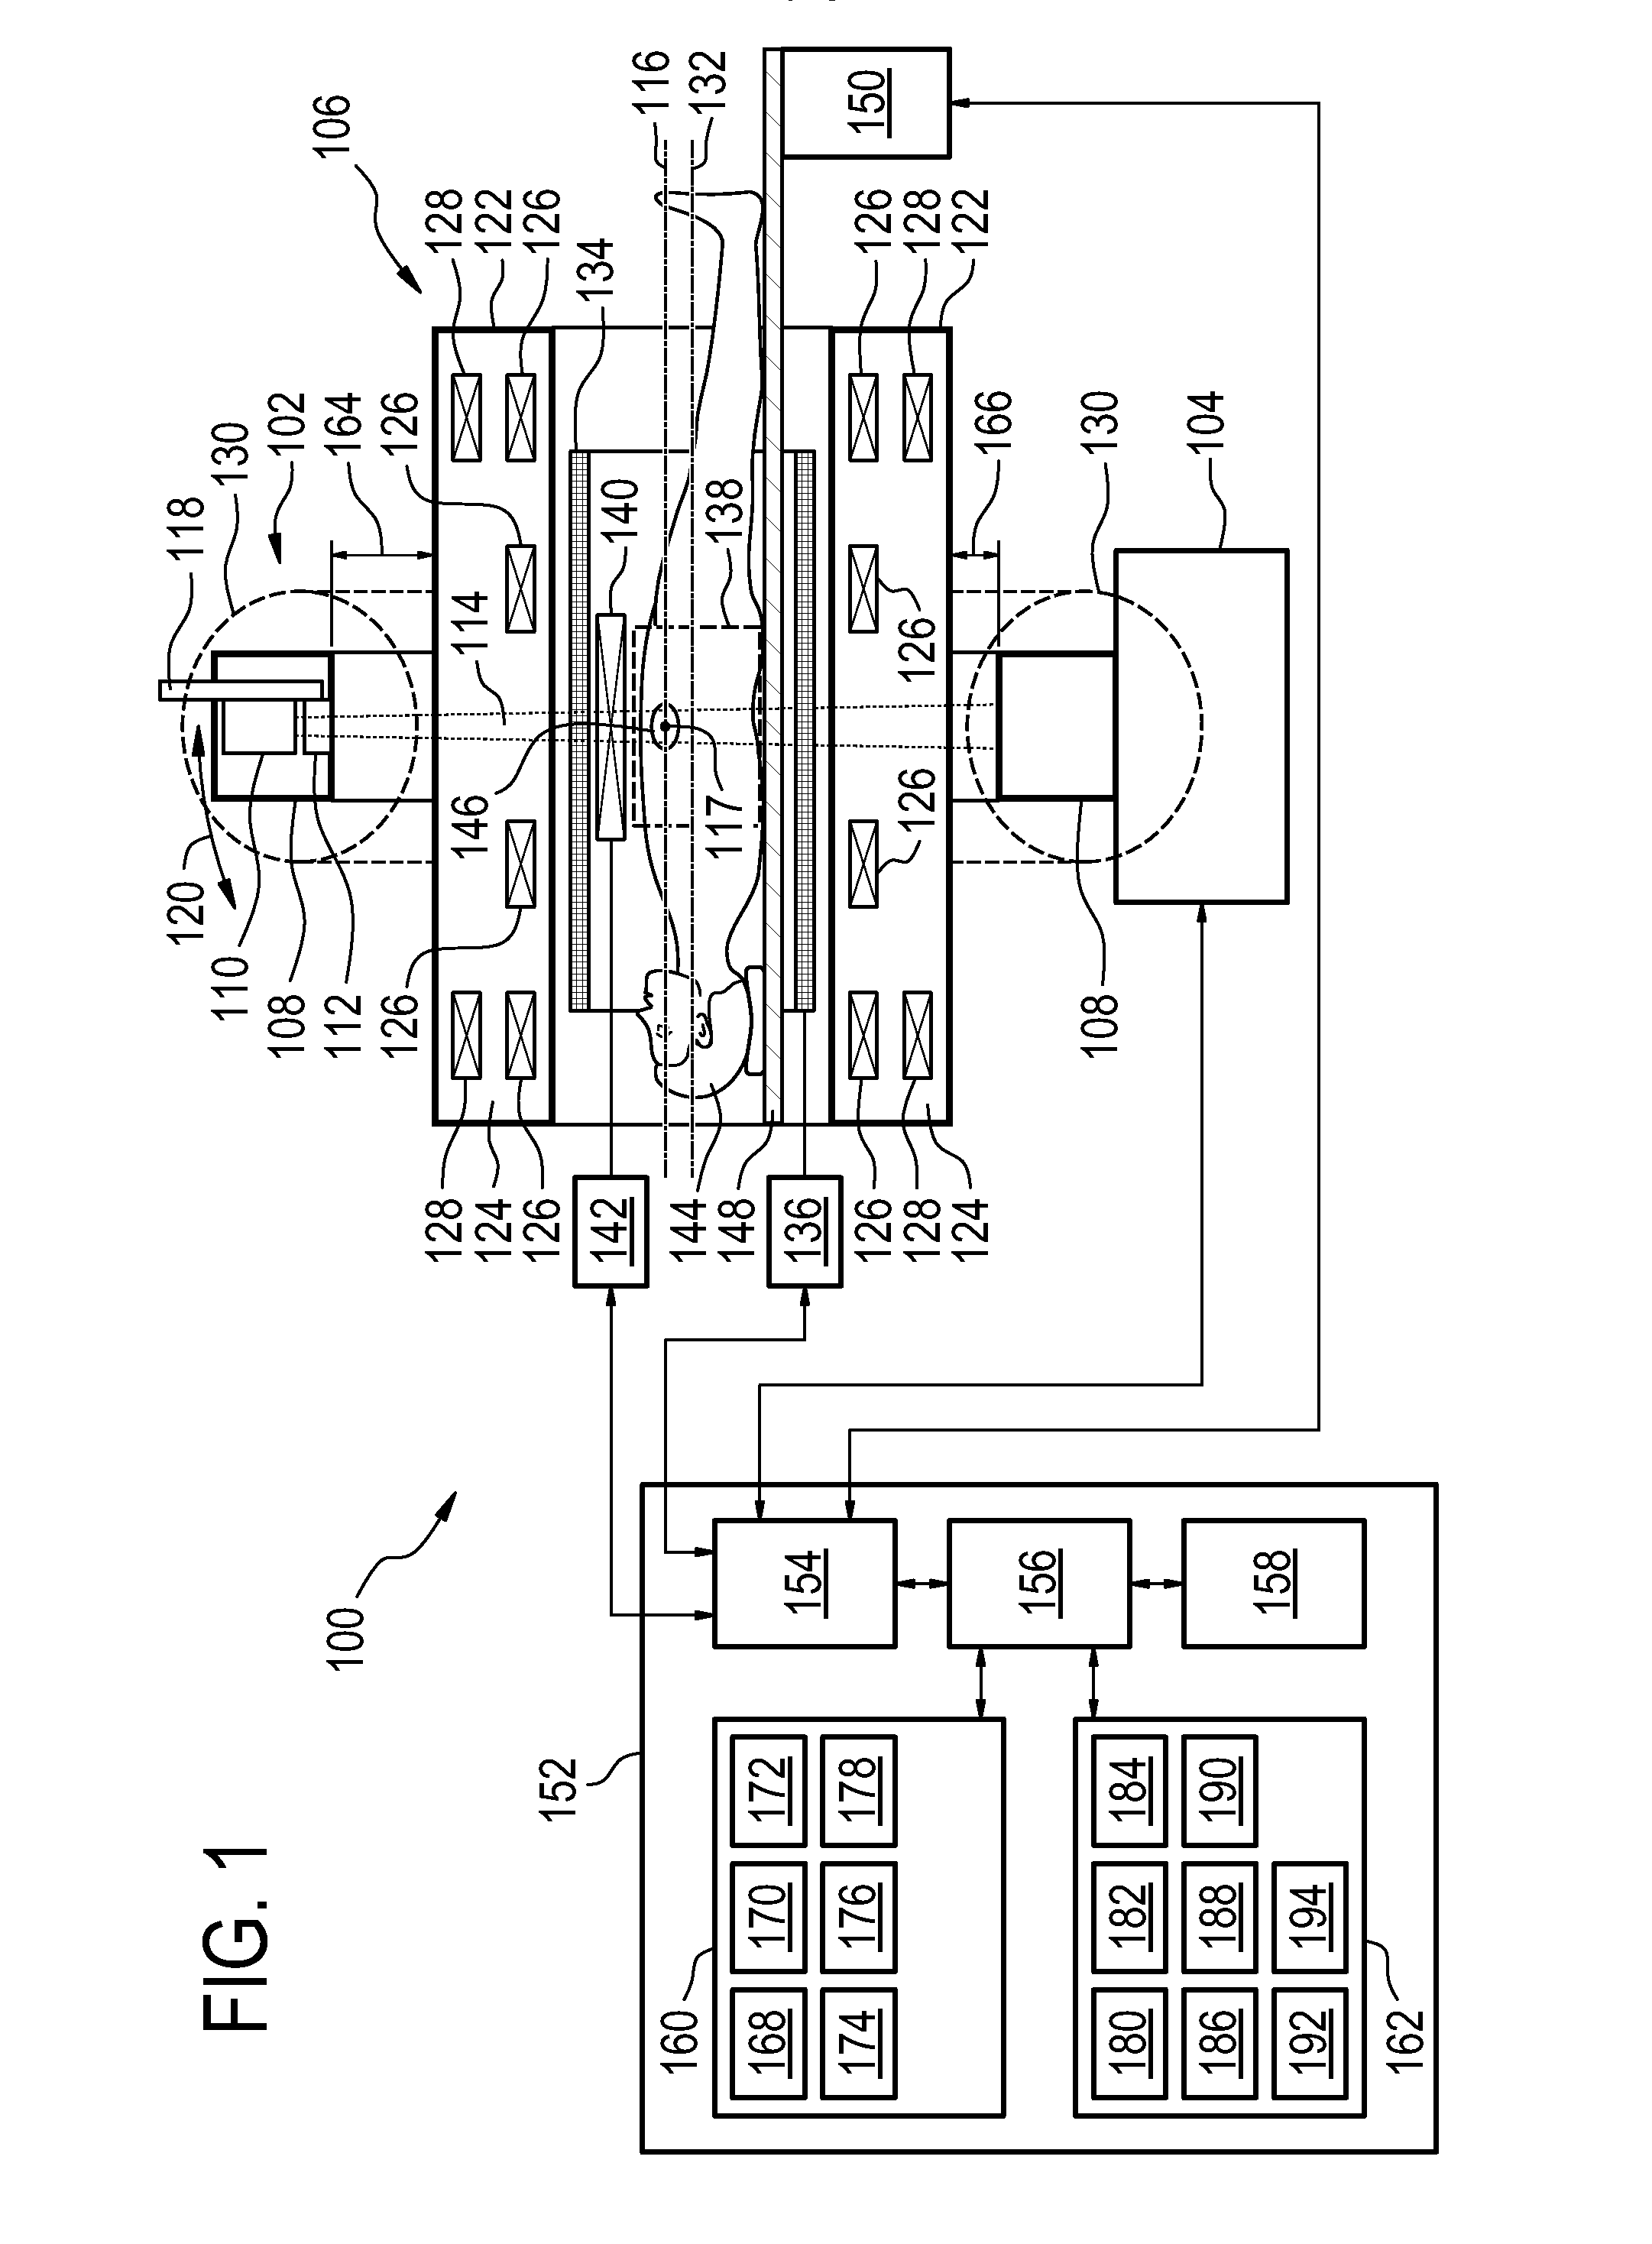 Magnetic resonance imaging system and radiotherapy apparatus with an adjustable axis of rotation